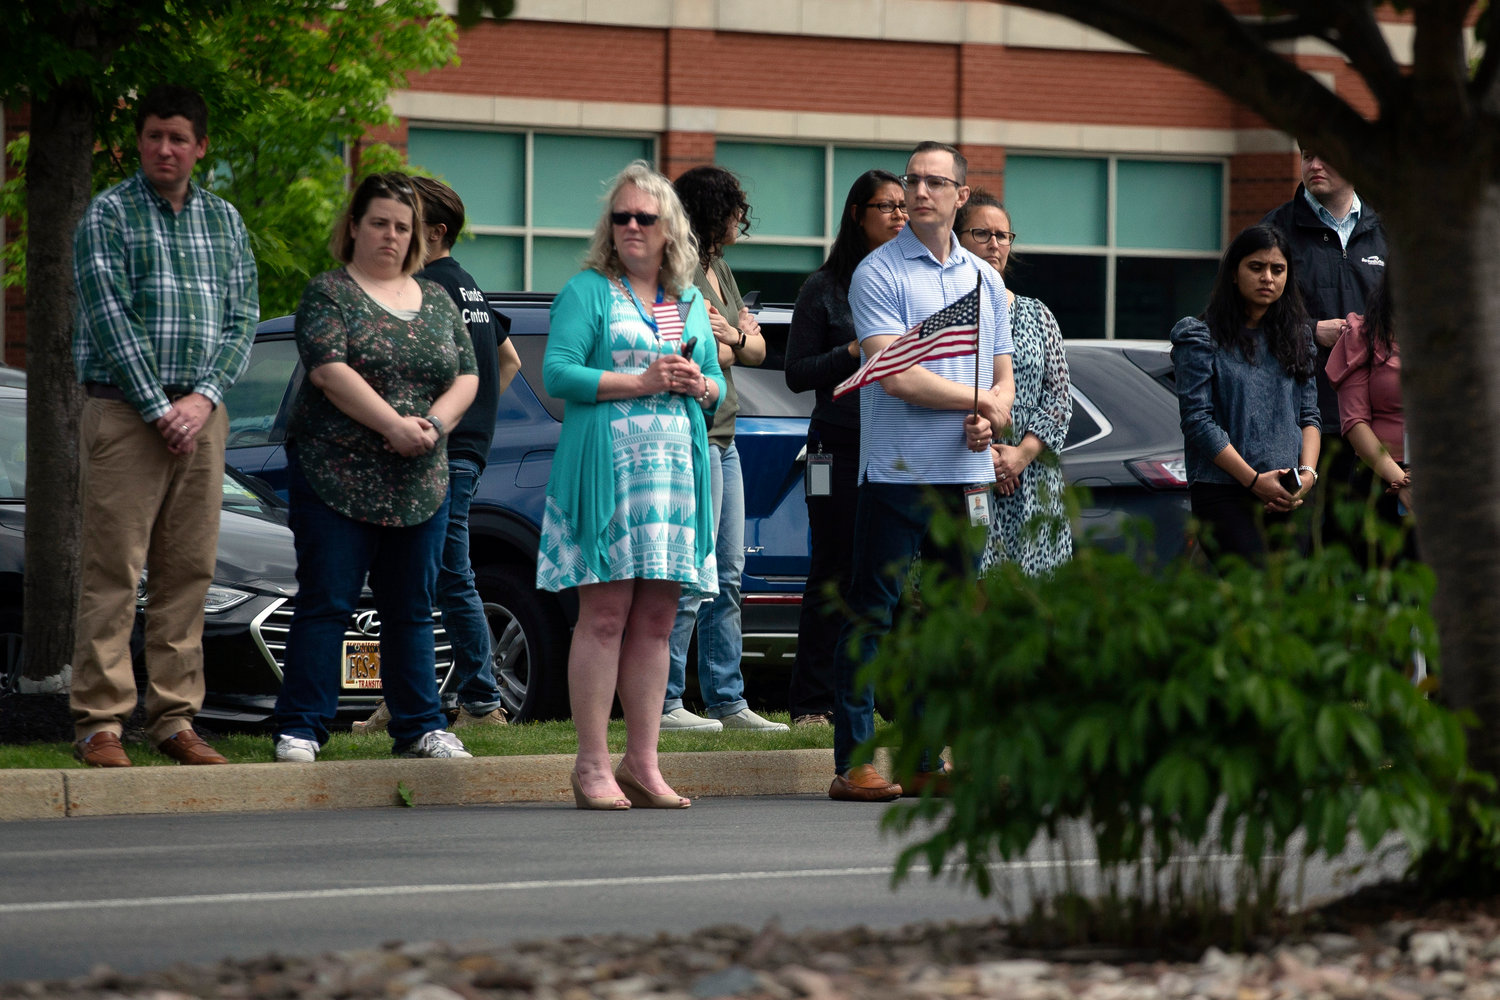 People stand to watch the procession after the funeral service for Aaron Salter Jr. at The Chapel at Crosspoint on Wednesday, May 25, 2022, in Getzville, N.Y. Salter Jr. was killed in the Buffalo supermarket shooting on May 14. (AP Photo/Joshua Bessex)